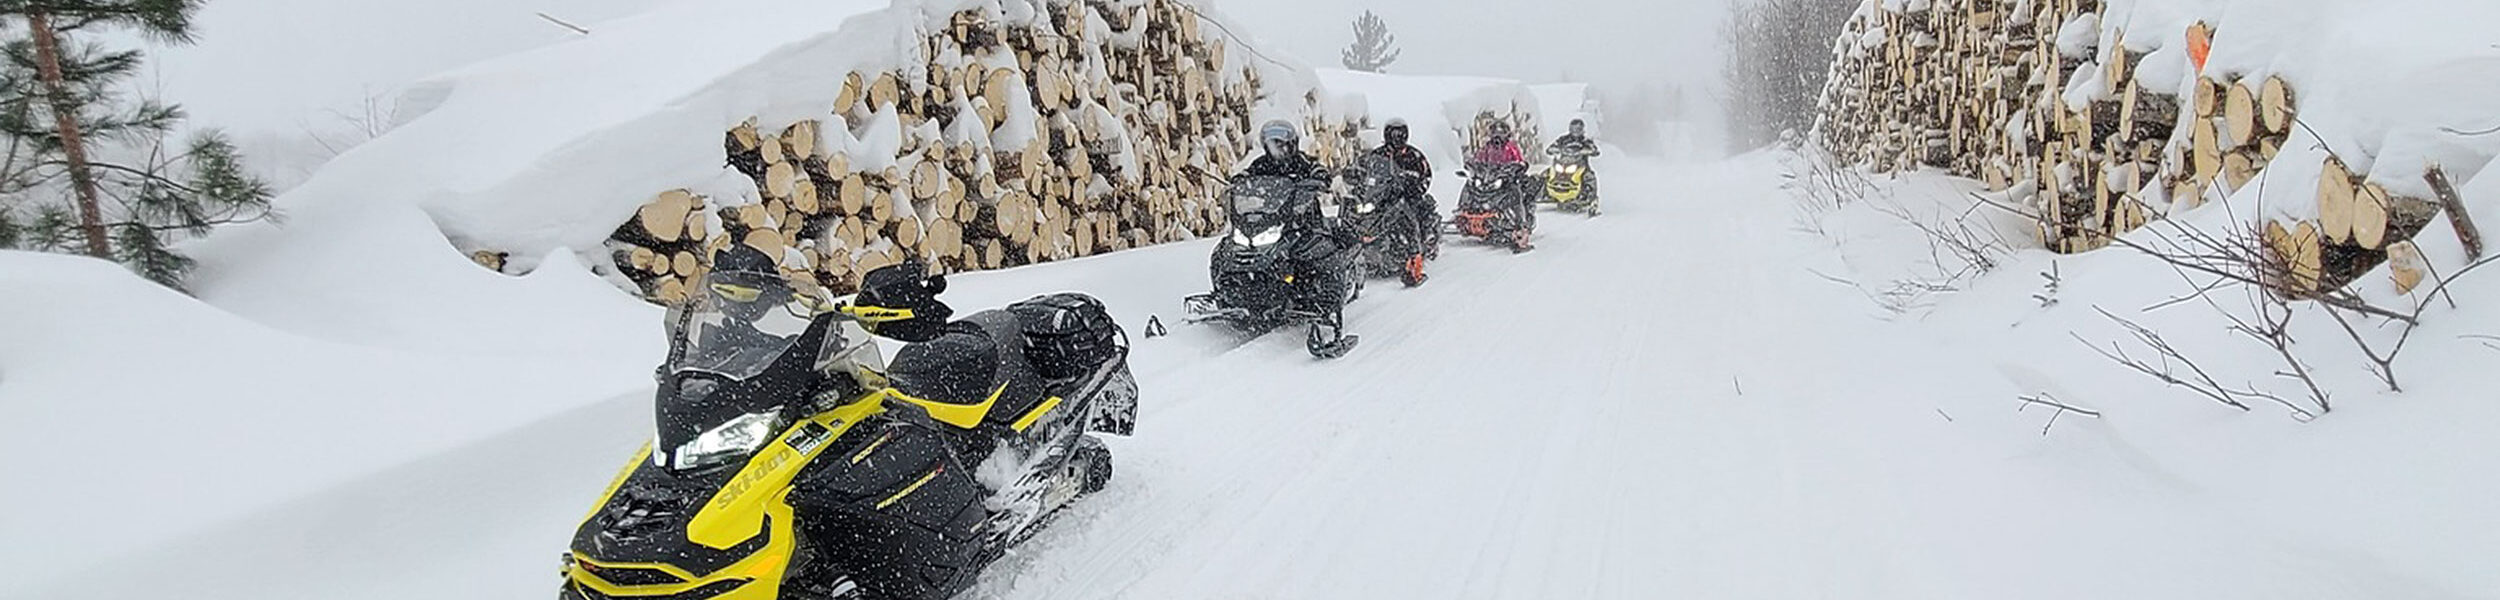 Snowmobilers riding on trail